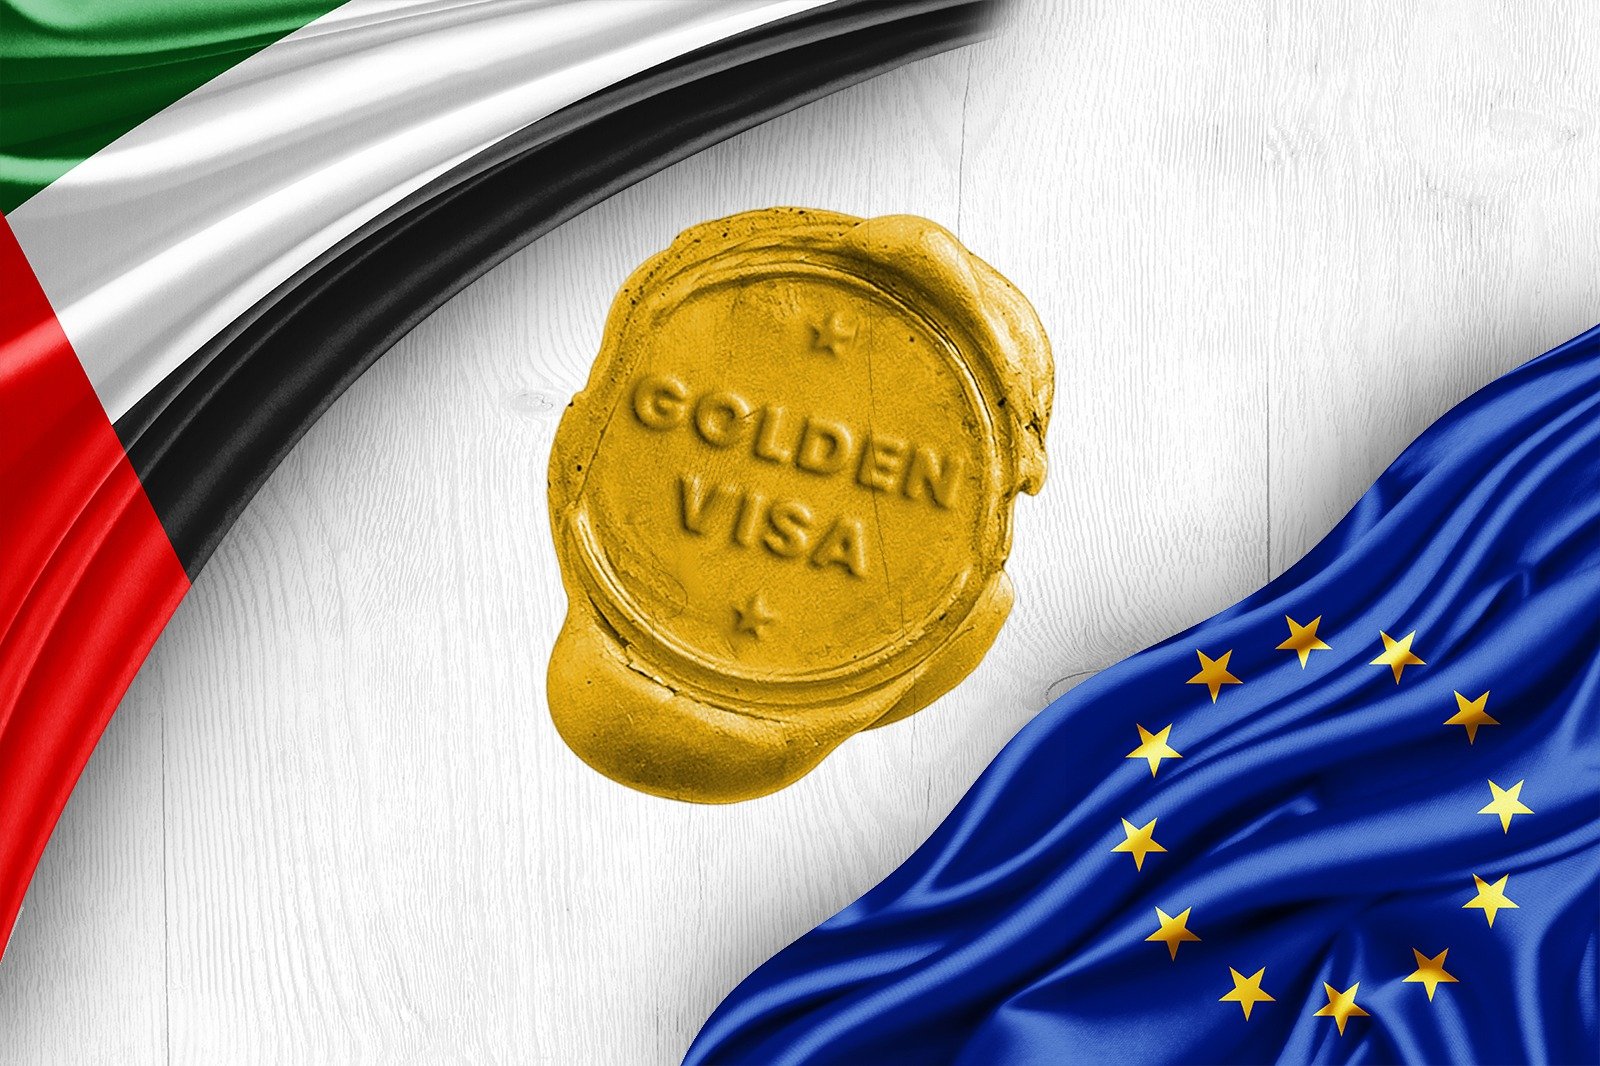 What are the European and UAE Golden Visa programs?